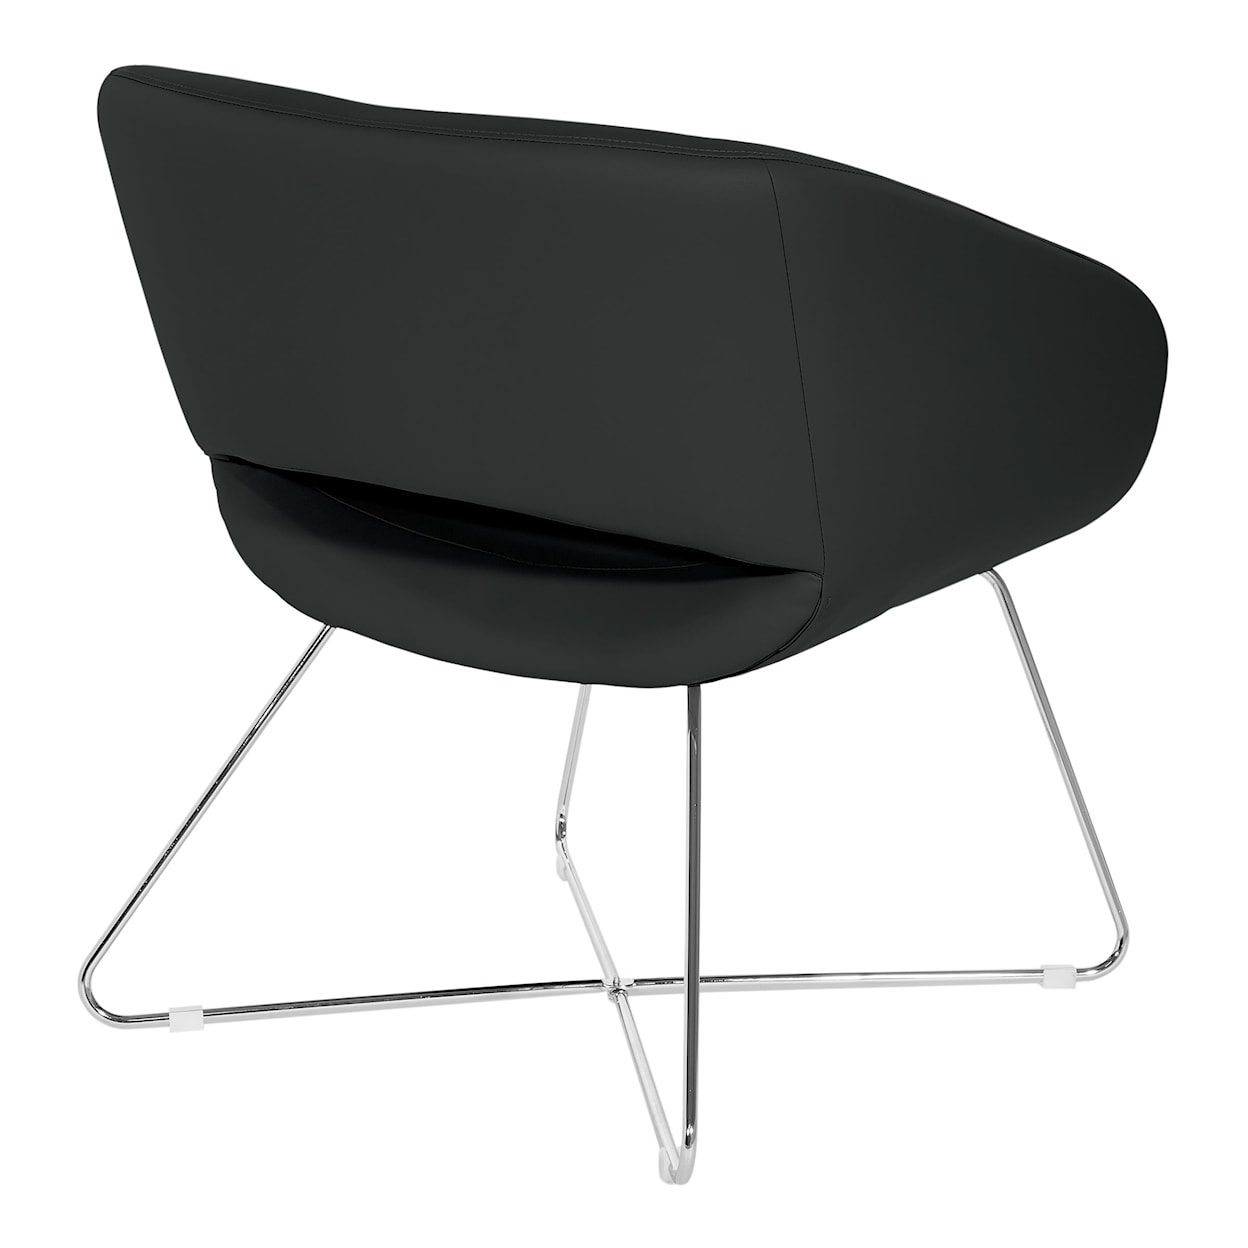 Office Star Resimercial Seating Chair